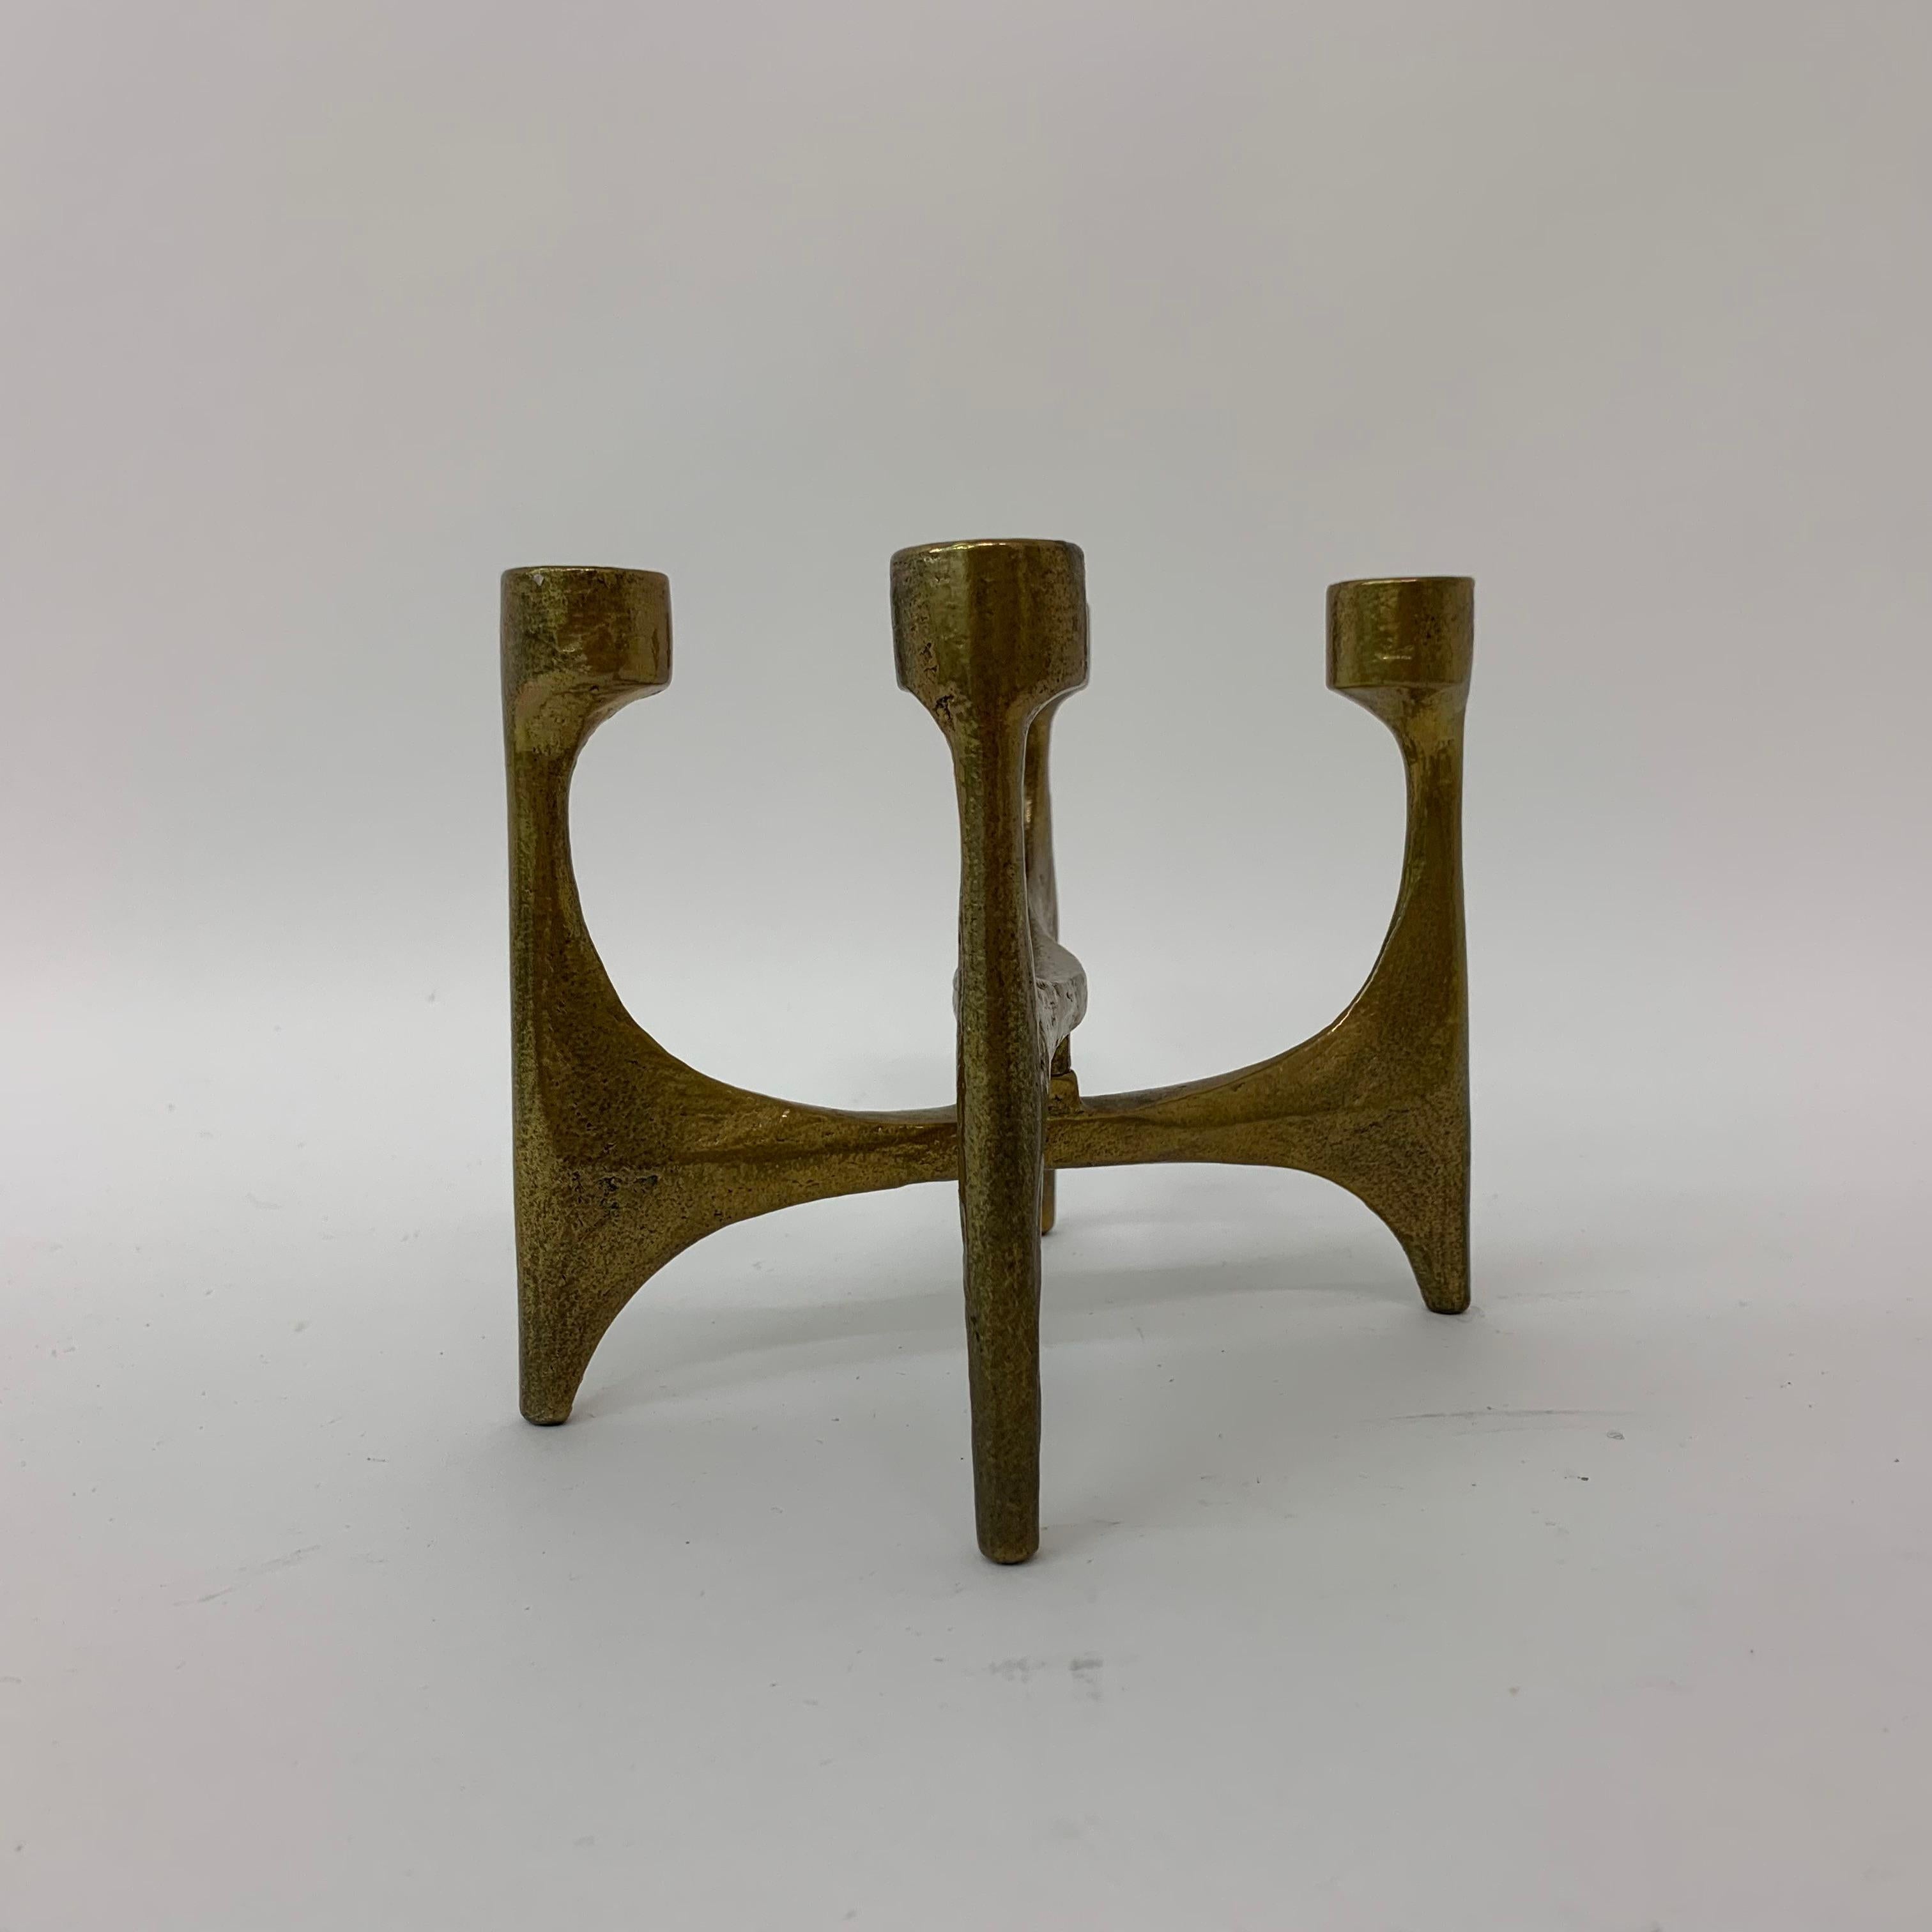 Brutalist Bronze Candle Stick, 1970’s For Sale 3